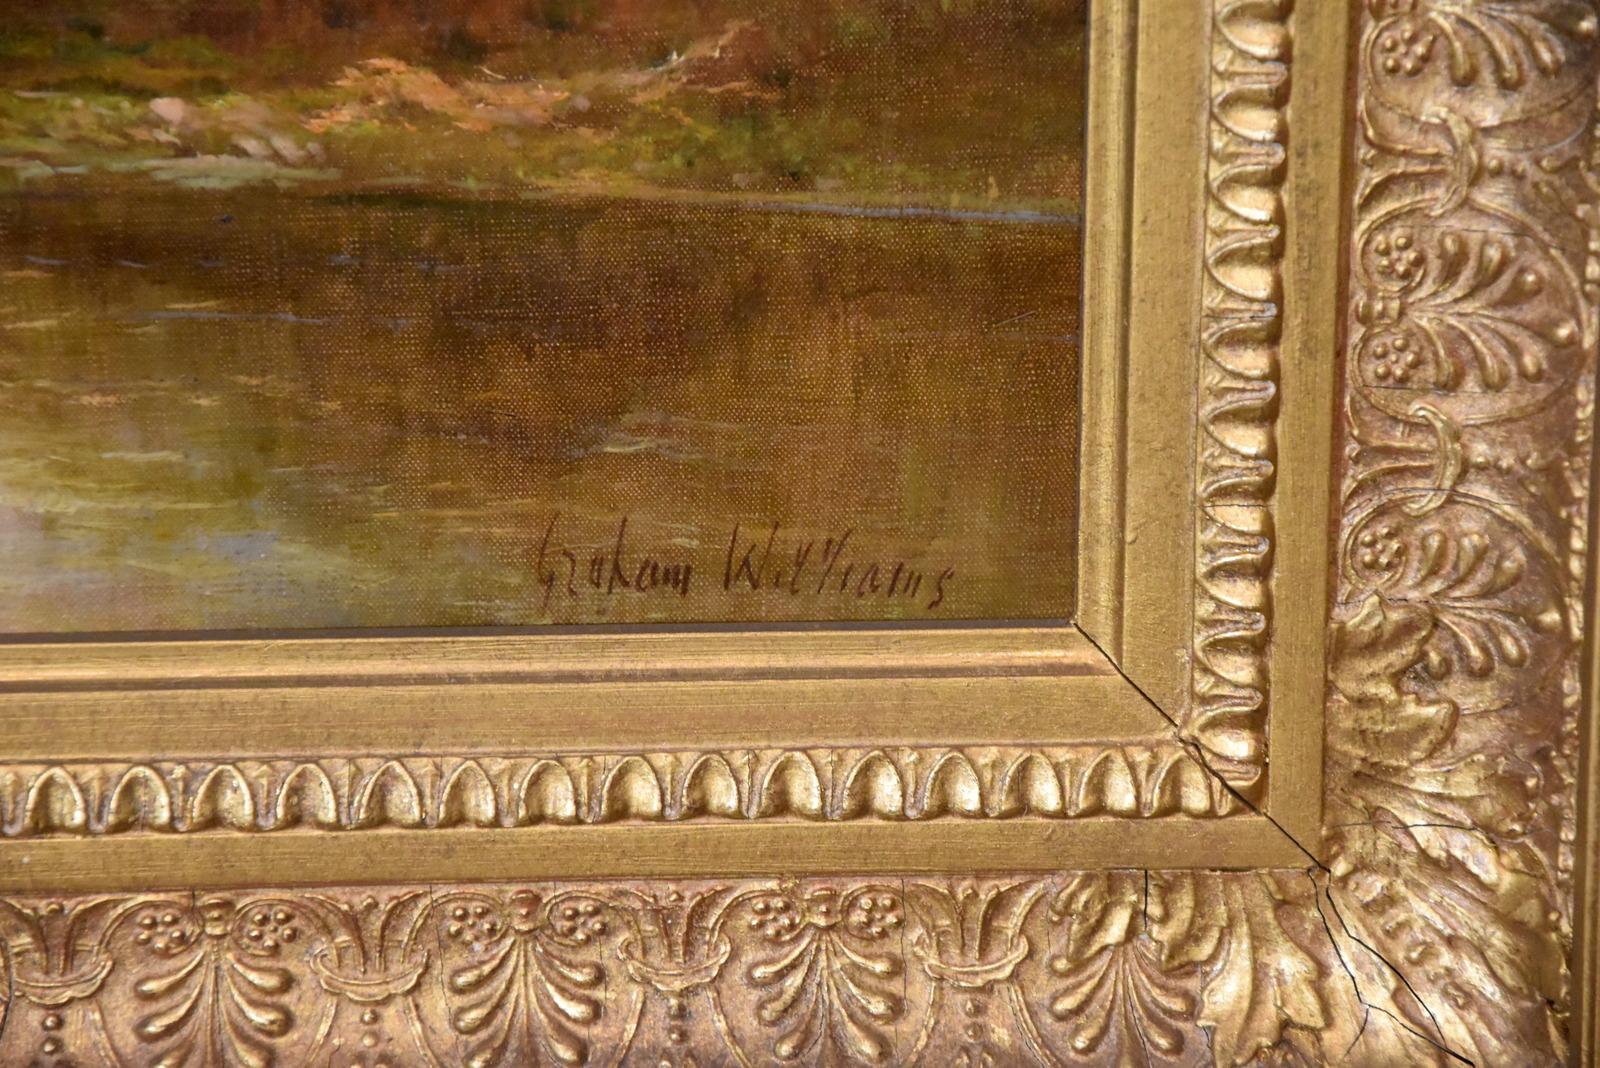 Oil Painting 'A Scottish River' by Graham Williams, psuedonym for F.E.Jamieson. Oil on canvas. signed and dated 1910

Dimensions unframed:-
Height 20' x Width 30'

Dimensions framed:-
Height 28.5' x Width 38.5'

All of the items that we advertise